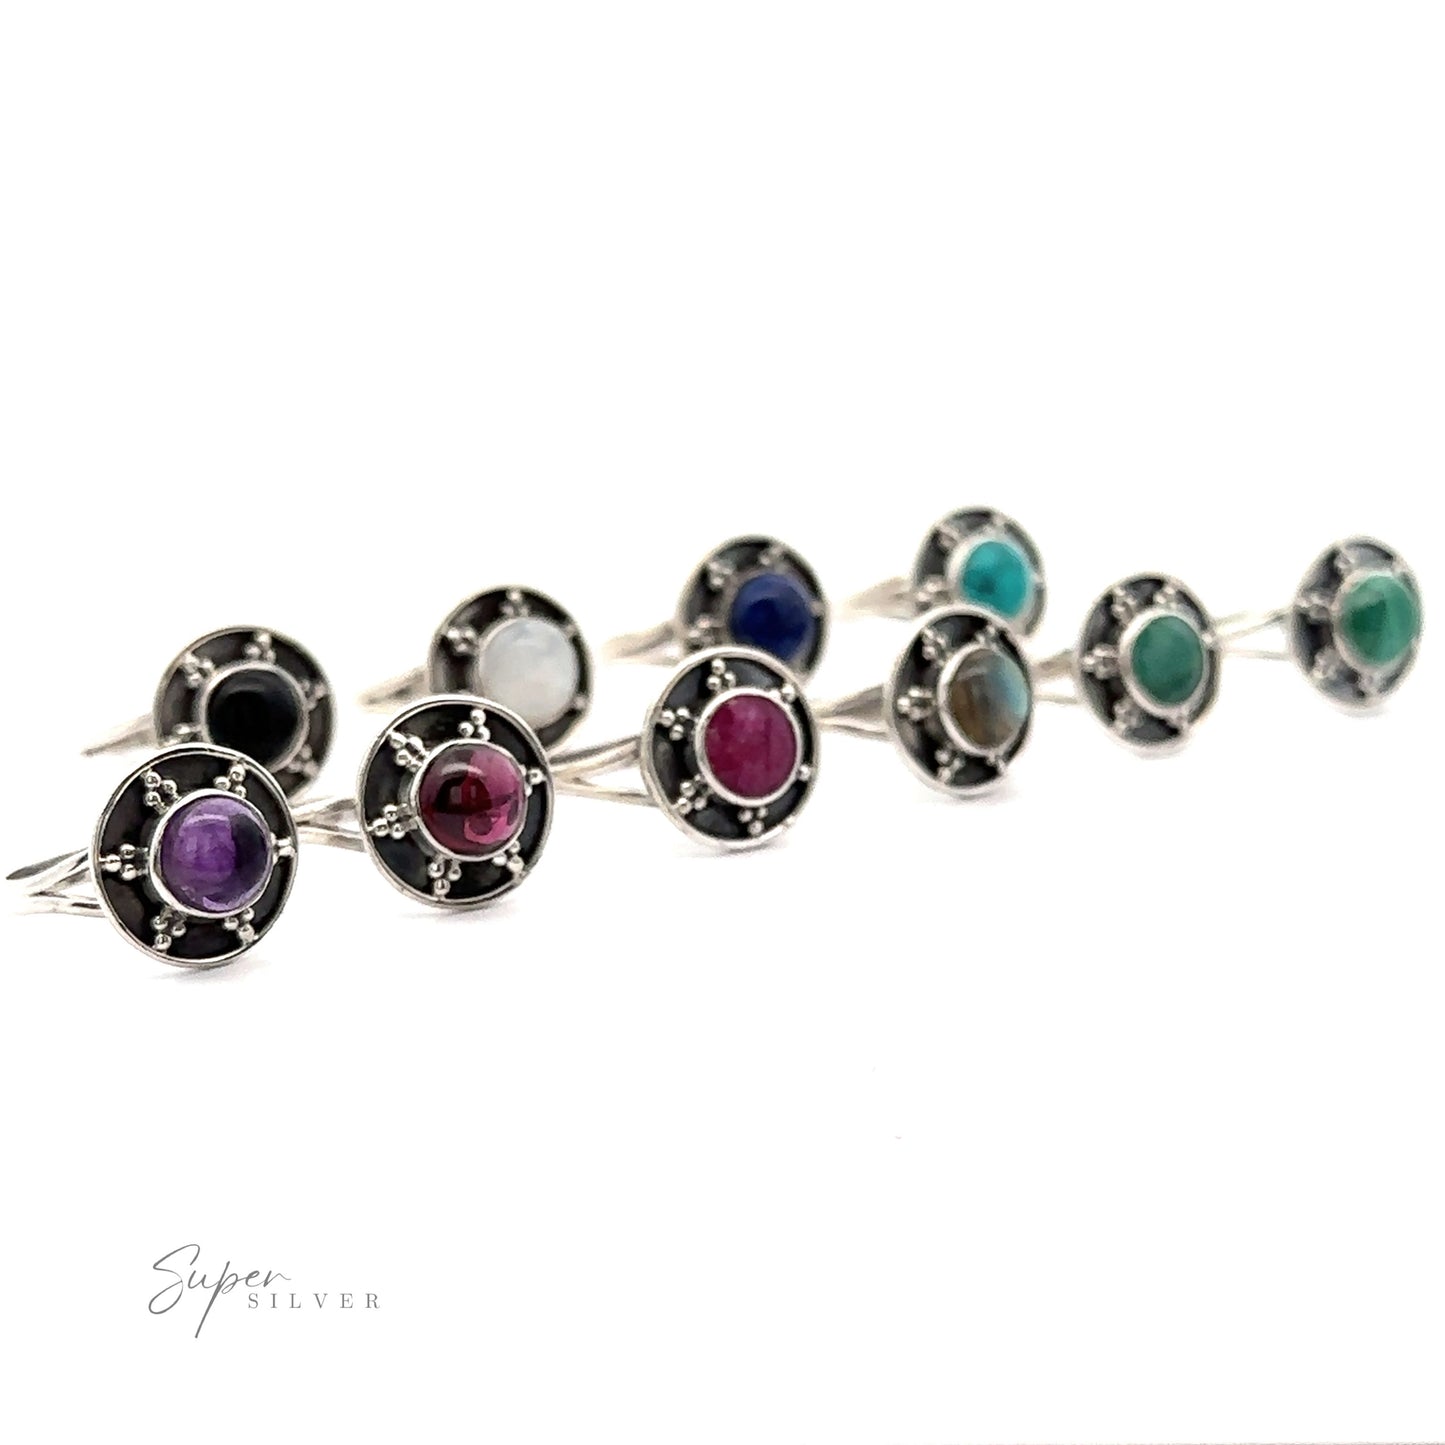 
                  
                    A collection of nine Gemstone Rings With Unique Oxidized Design, each showcasing a different colored gemstone set in an oxidized silver circular mount, arranged in three rows against a white background.
                  
                